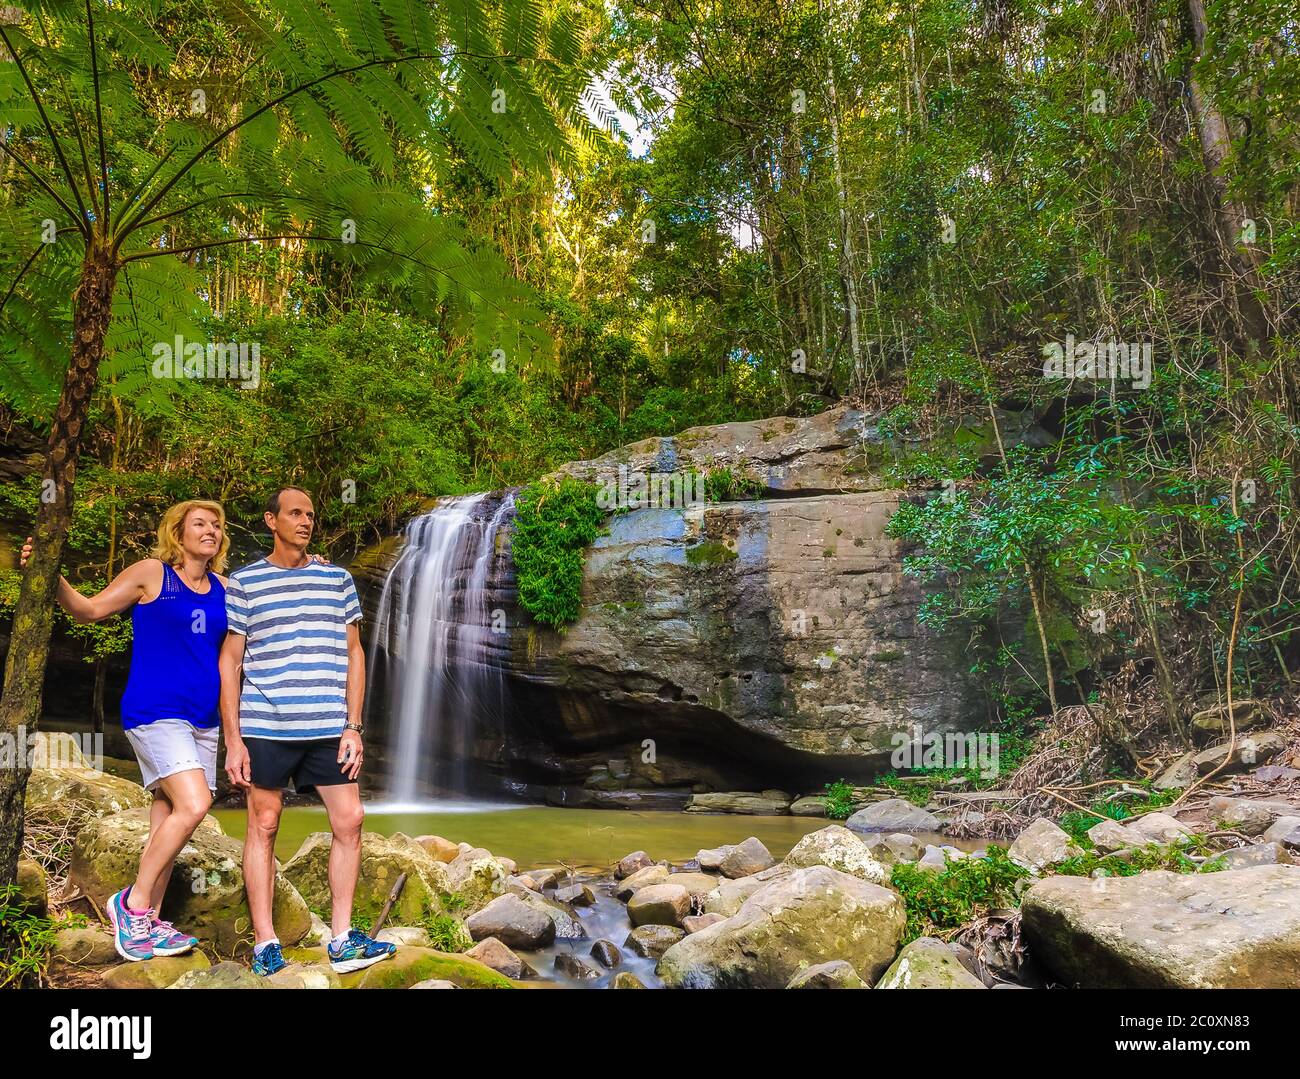 Tourist couplestand under large fern tree with Serenity Falls in the background of Stock Photo